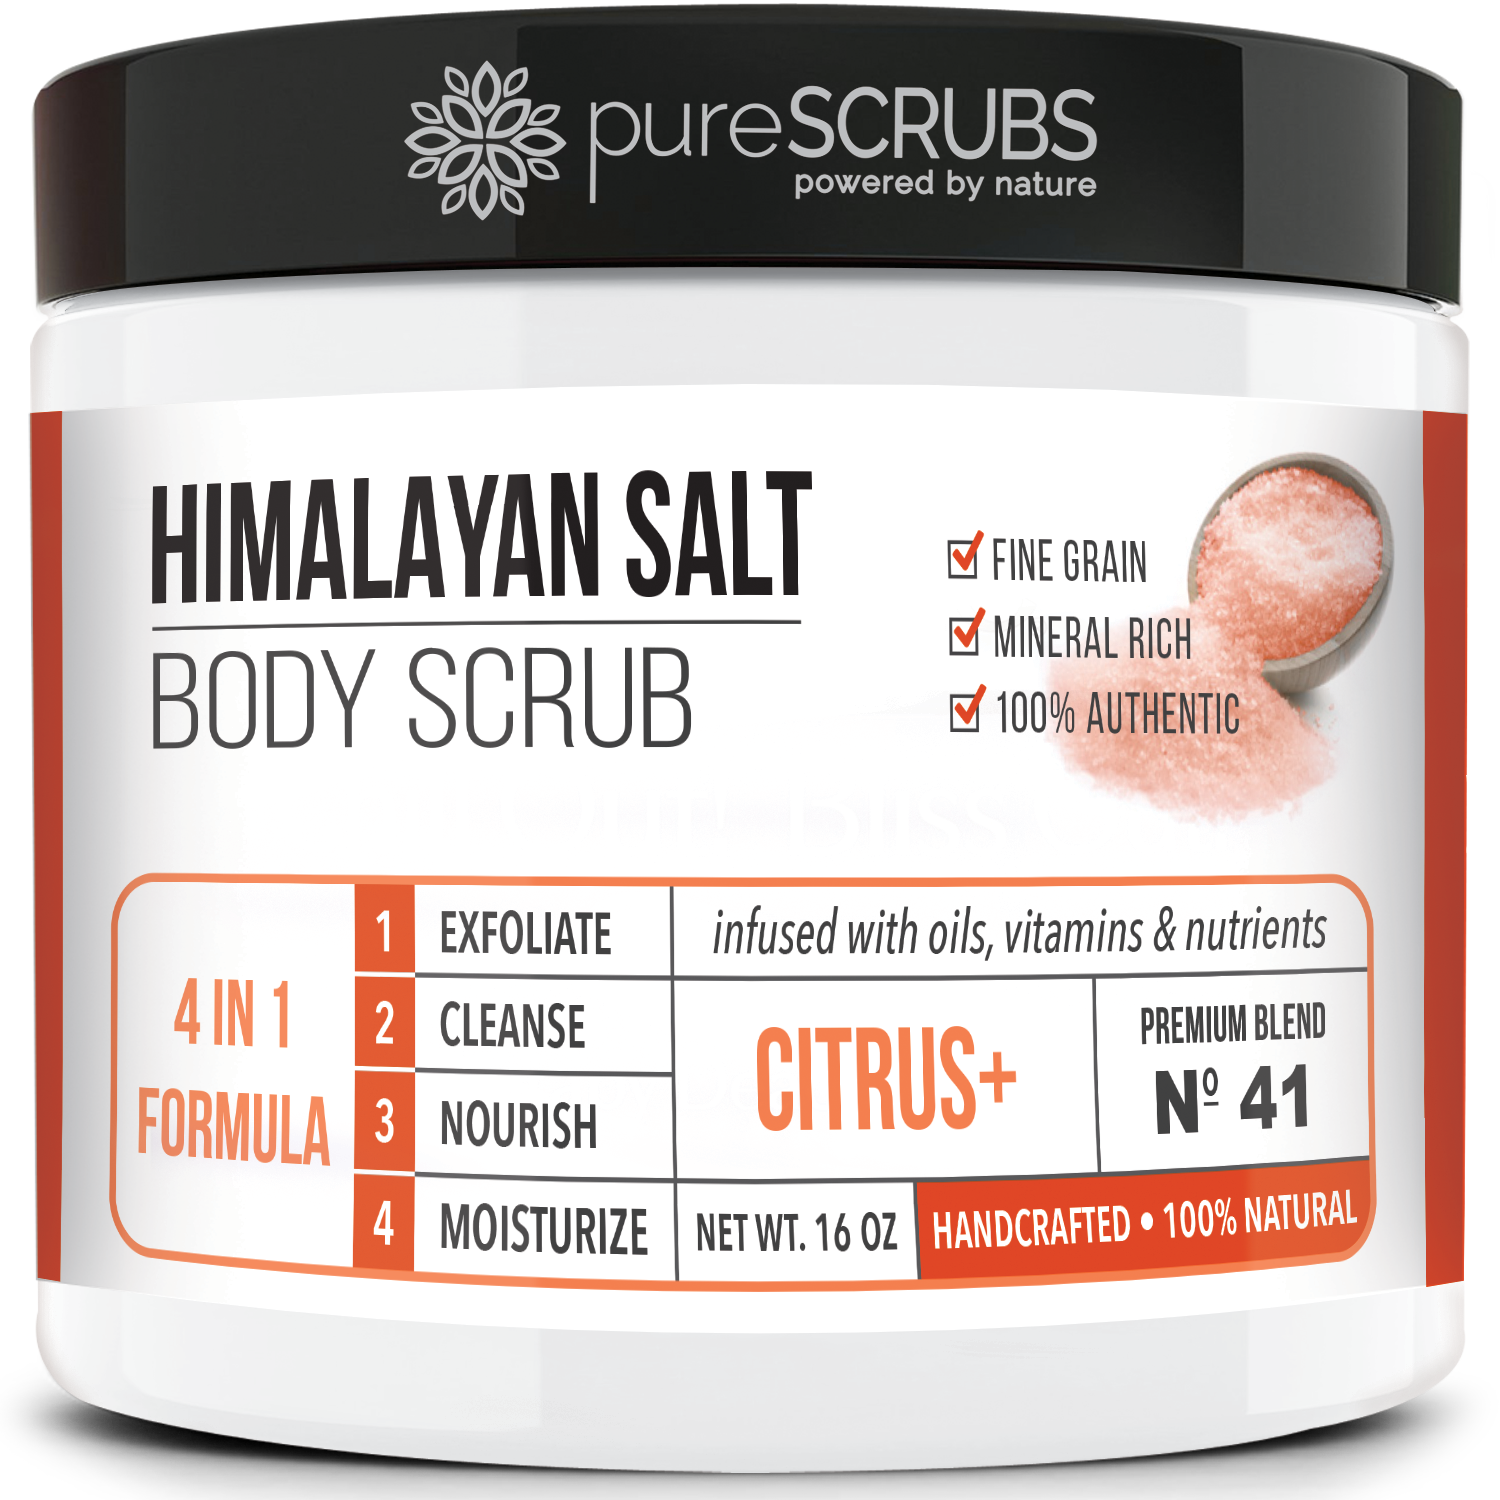 purescrubs 16oz jar citrus pink himalayan salt body scrub Premium Blend #41 to exfoliate your skin comes with free loofah pad free exfoliating organic oatmeal bar soap shea butter and honey and free eco-friendly bamboo spoon to stir and scoop out the scrub 